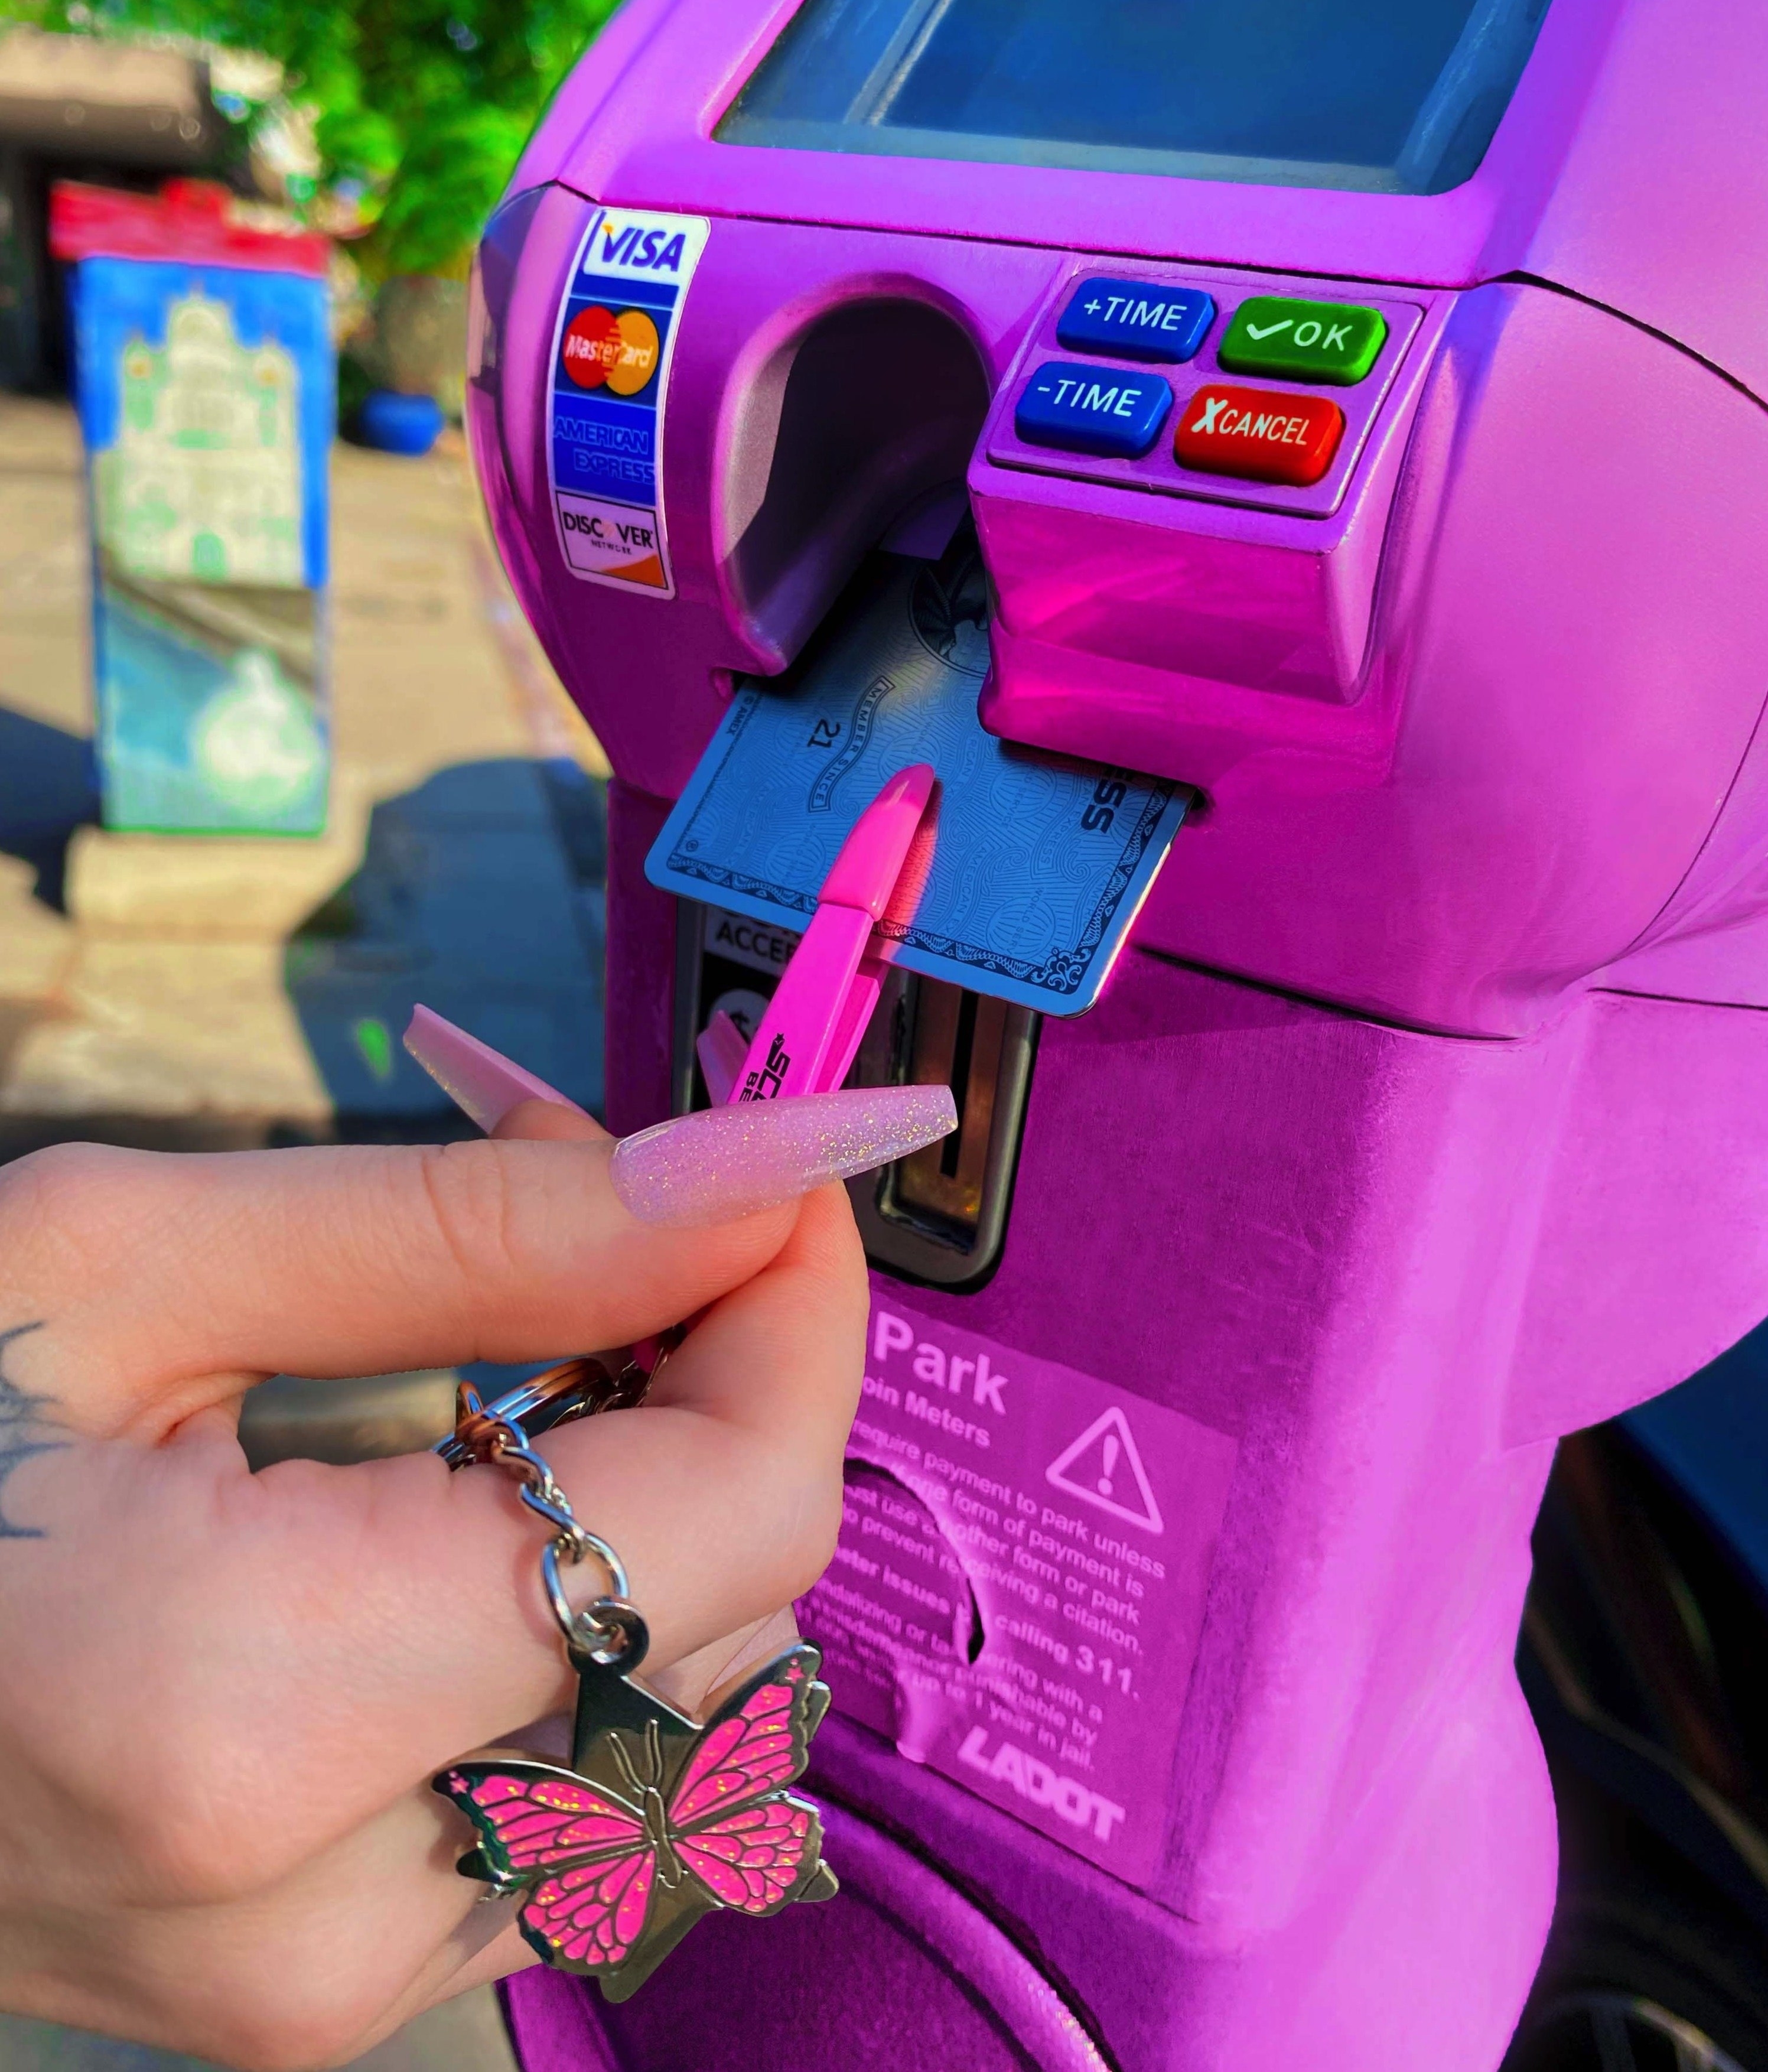 person using a pair of tweezers on a keychain to pull a credit card in and out of a parking meter